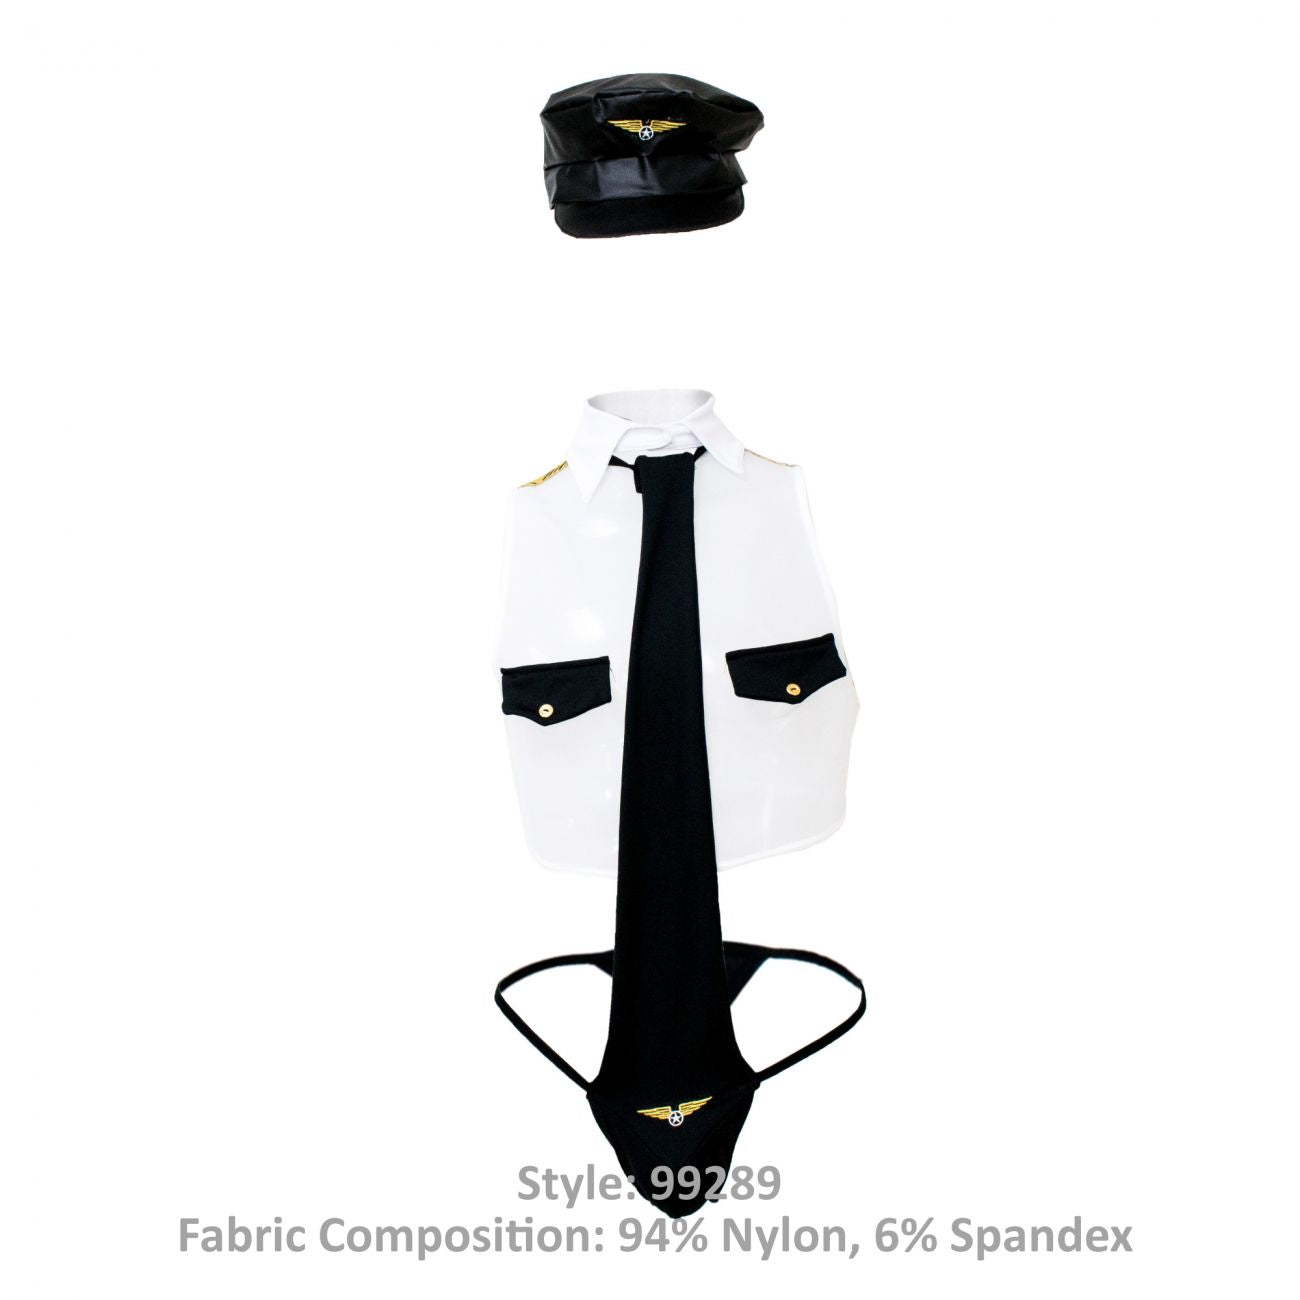 CandyMan 99289 Pilot Costume Outfit